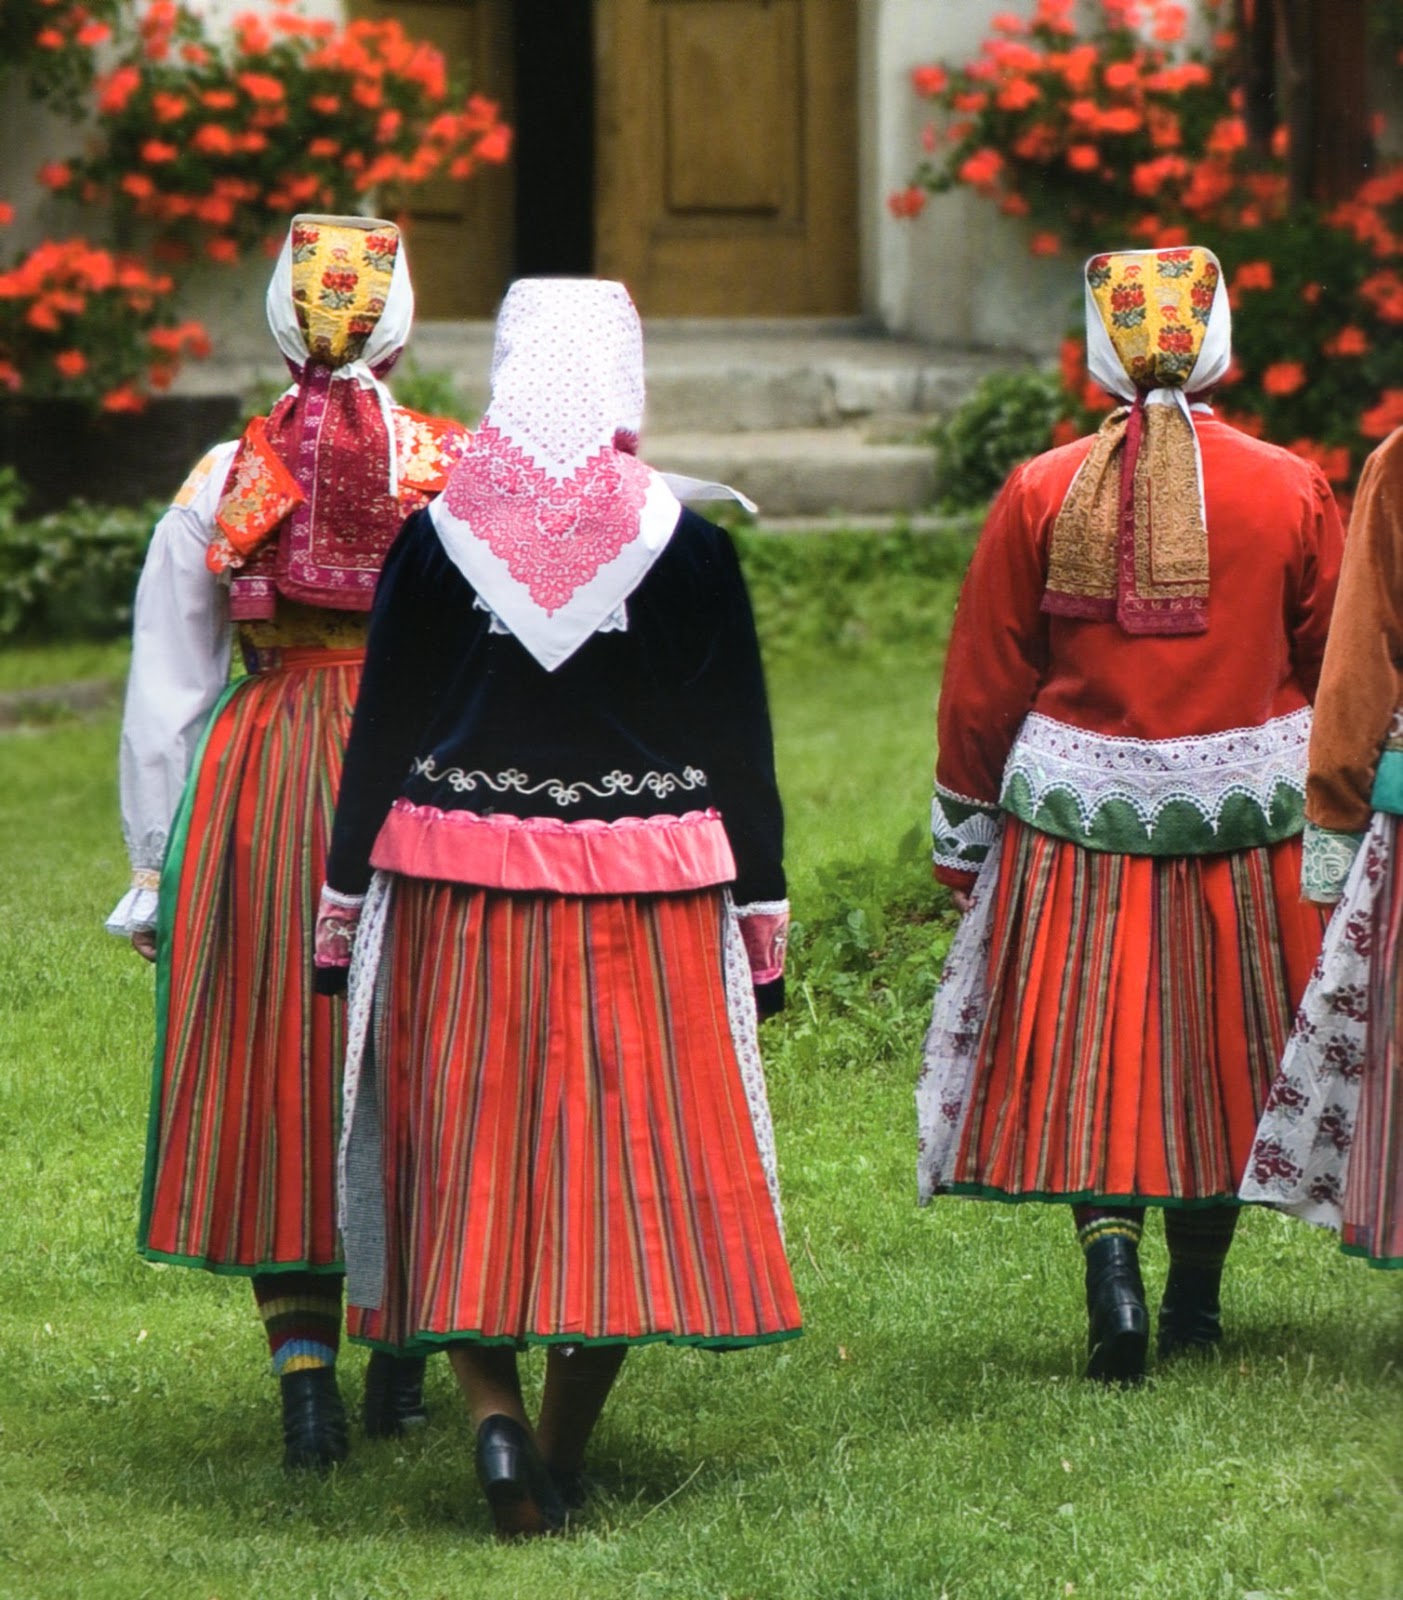 FolkCostume&Embroidery: Costume and Embroidery of Wymysorys or ...